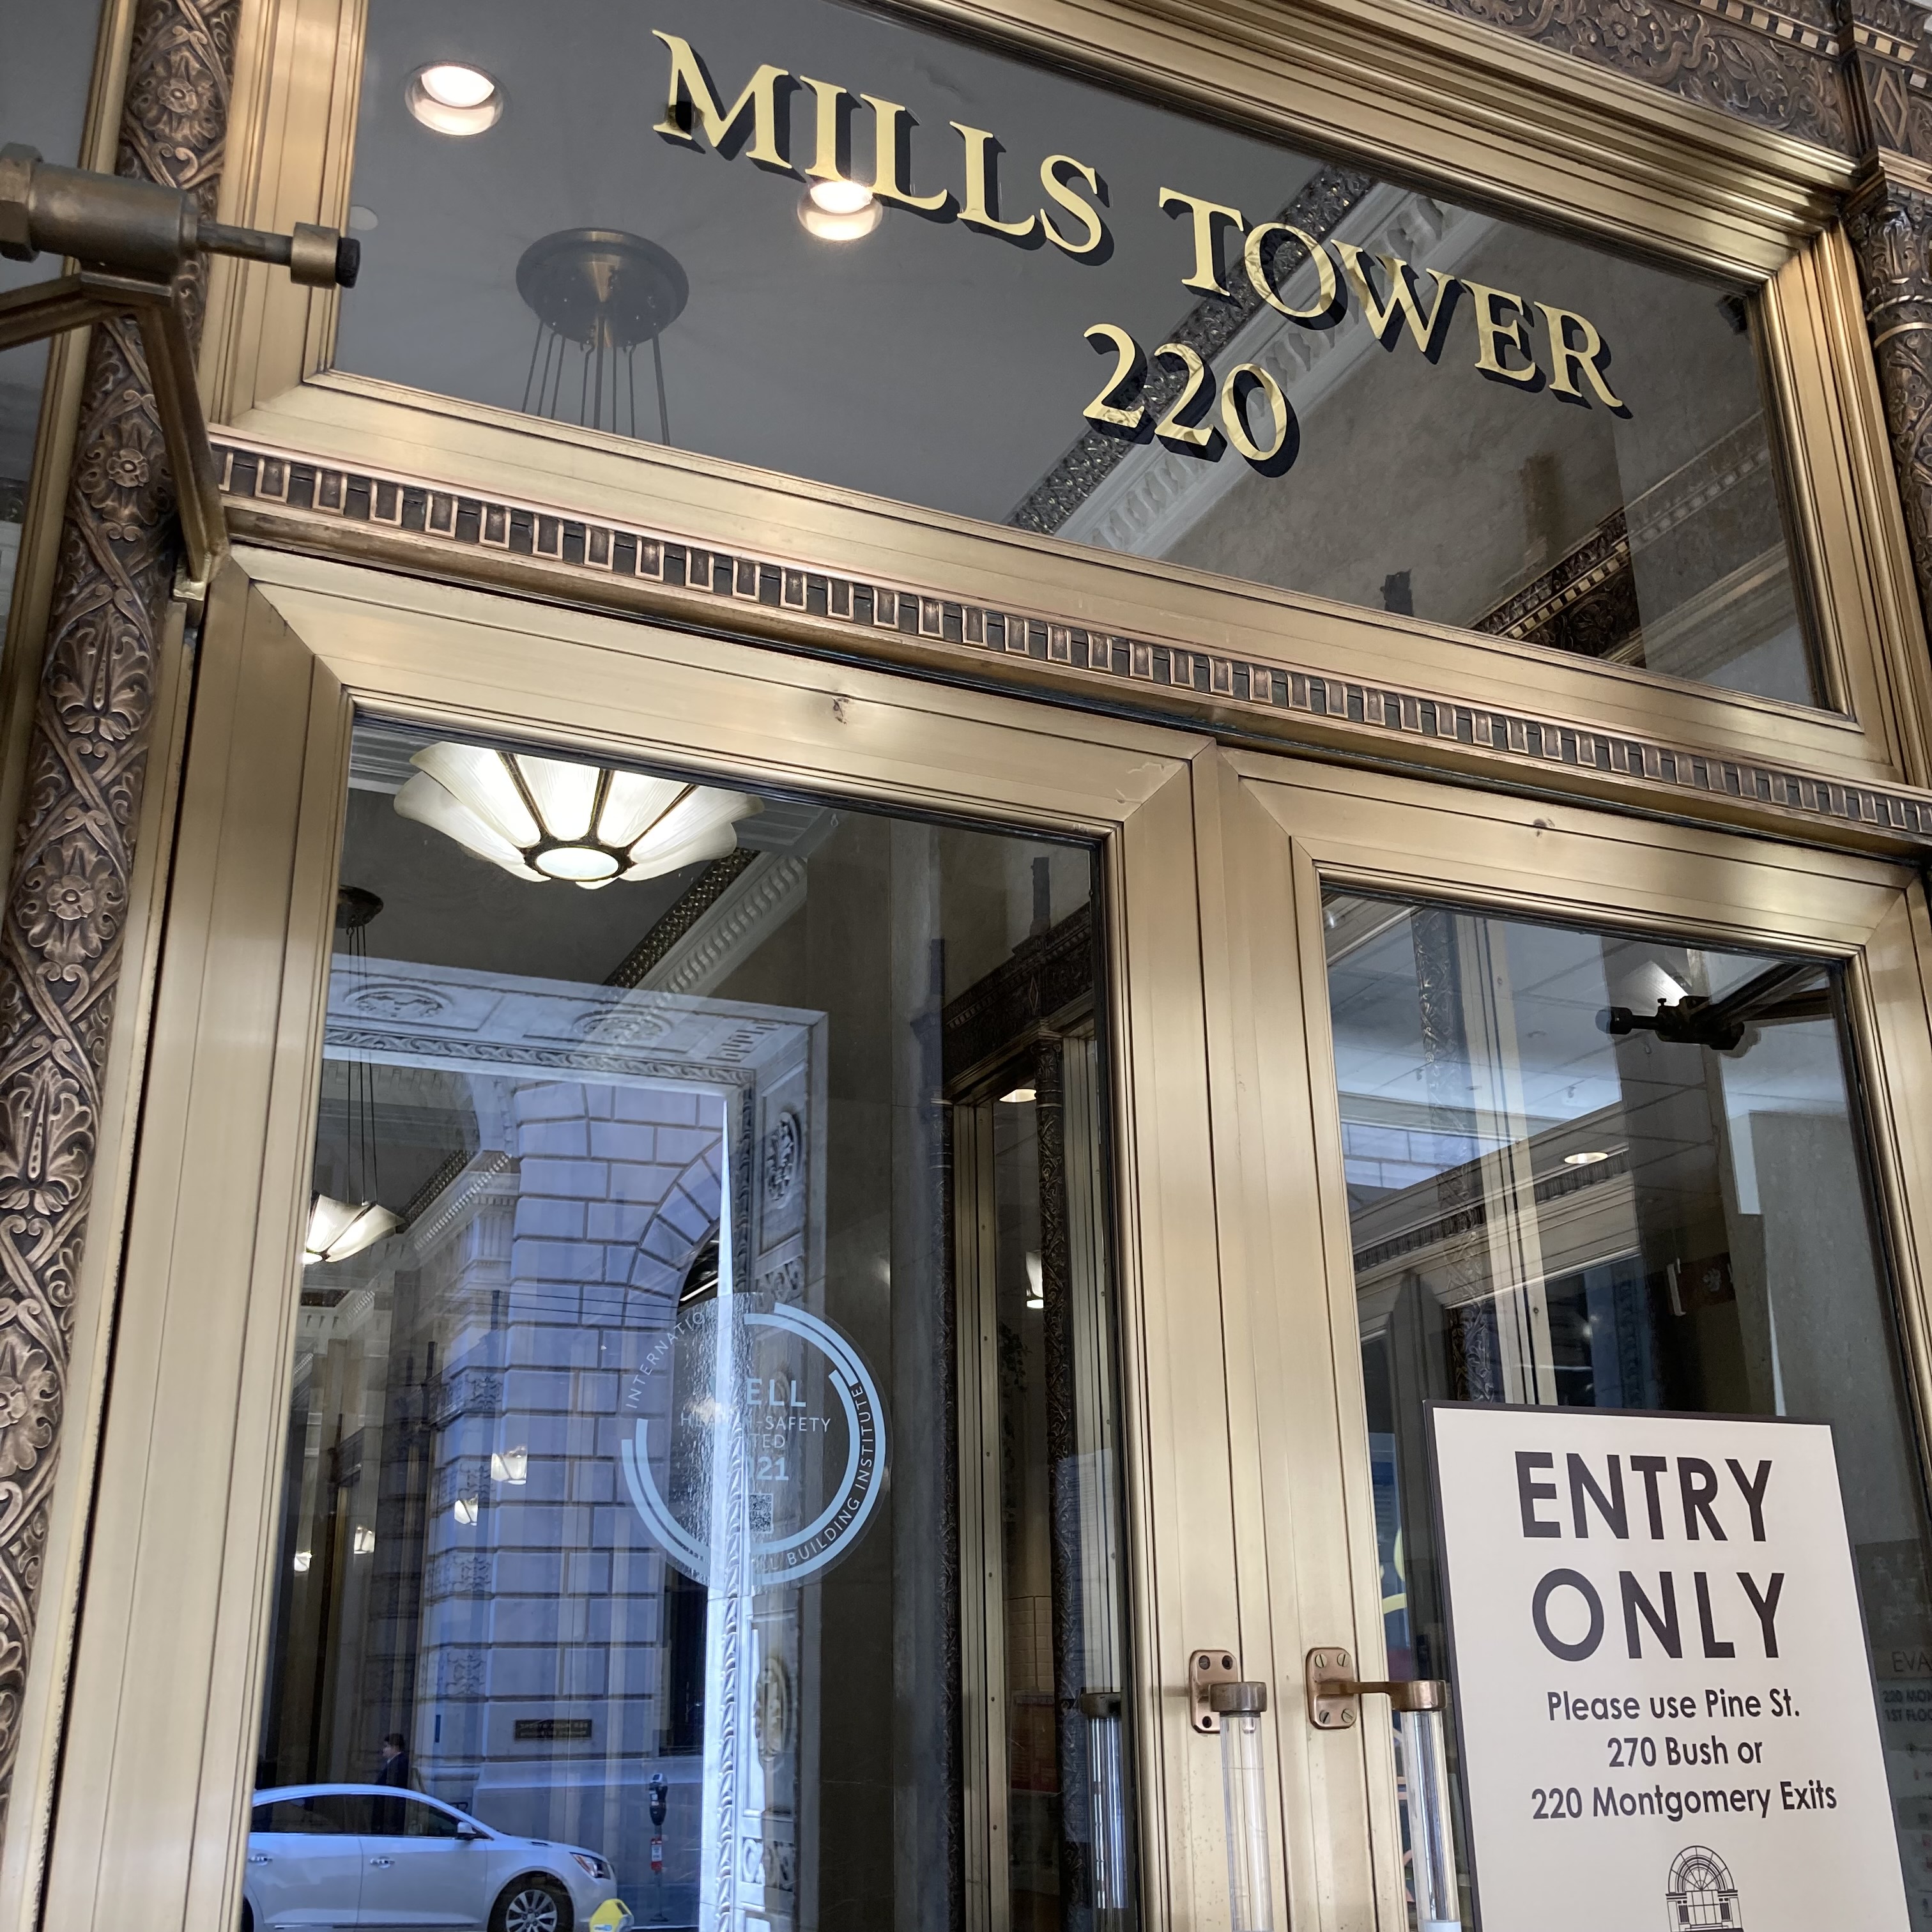 Mills tower entry